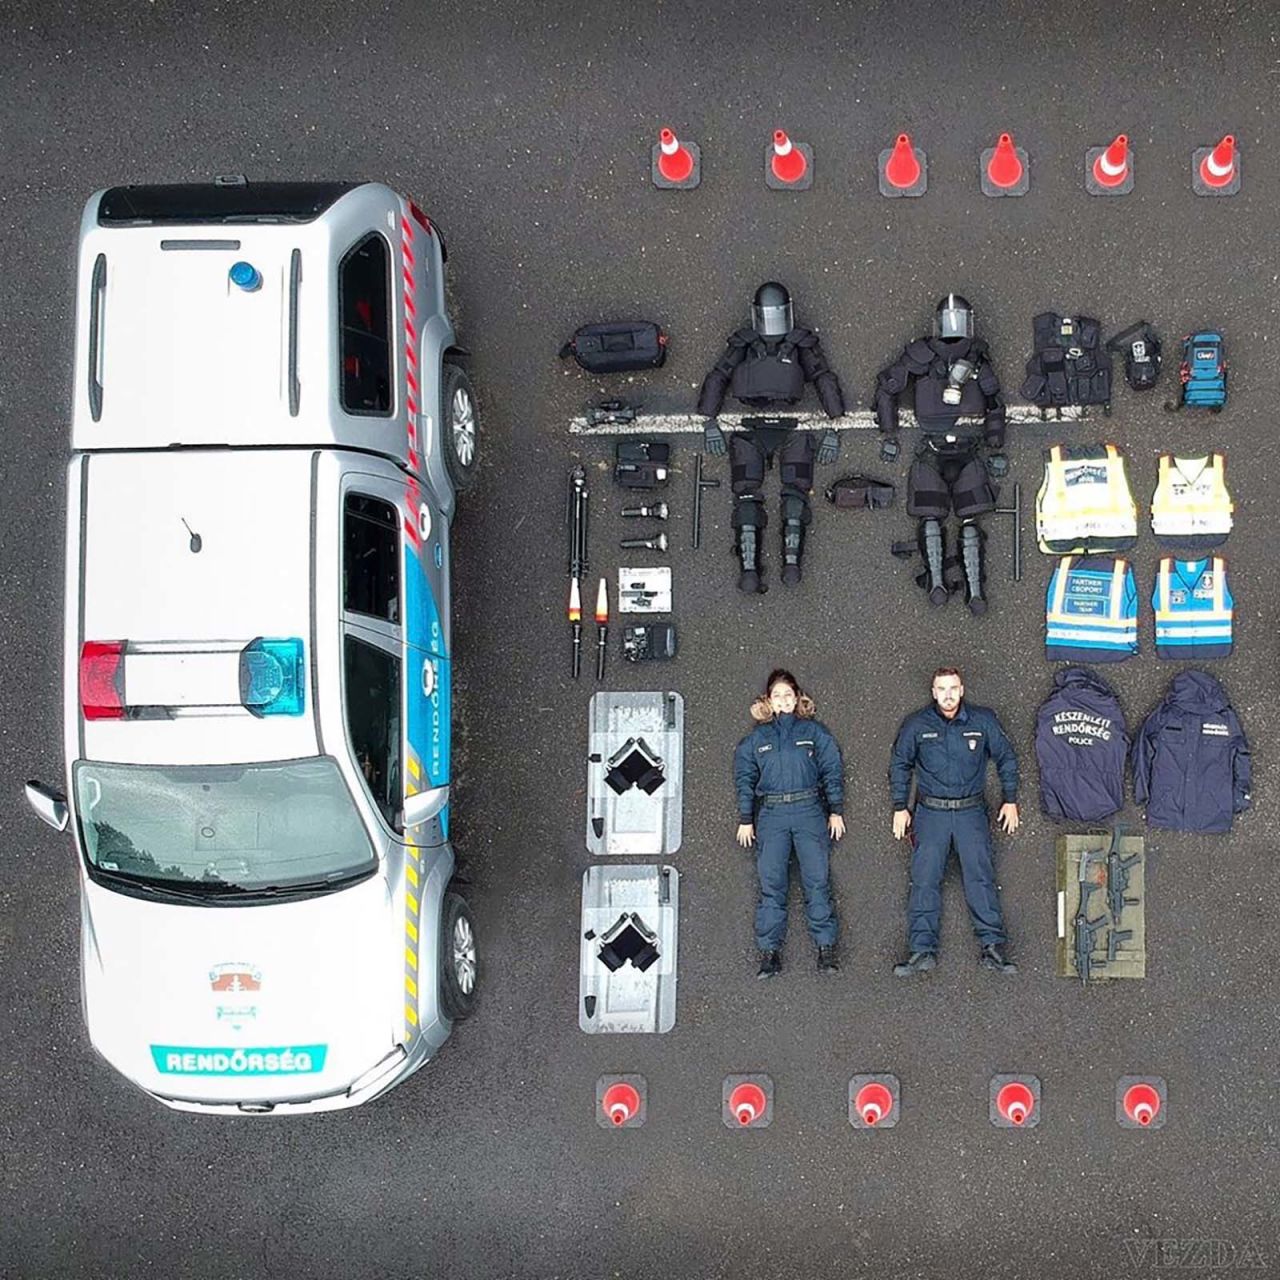 Hungarian police display a patrol car and its contents.